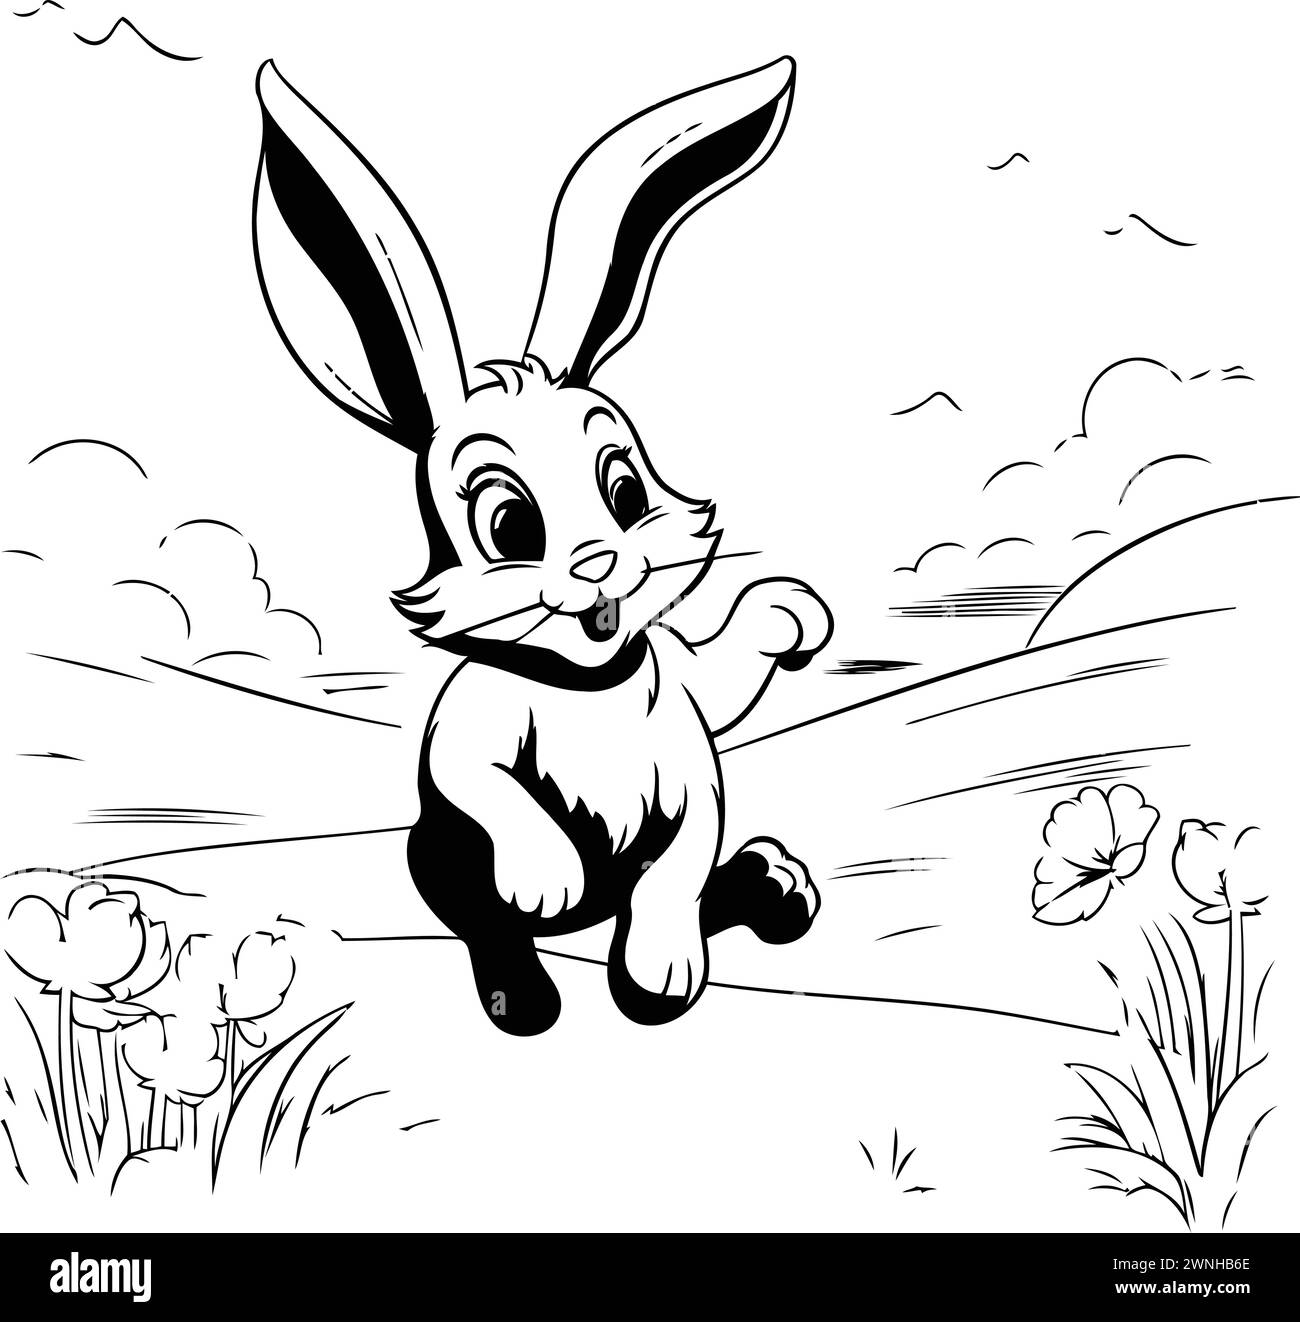 Easter Bunny Running in the Field - Black and White Cartoon Illustration Stock Vector